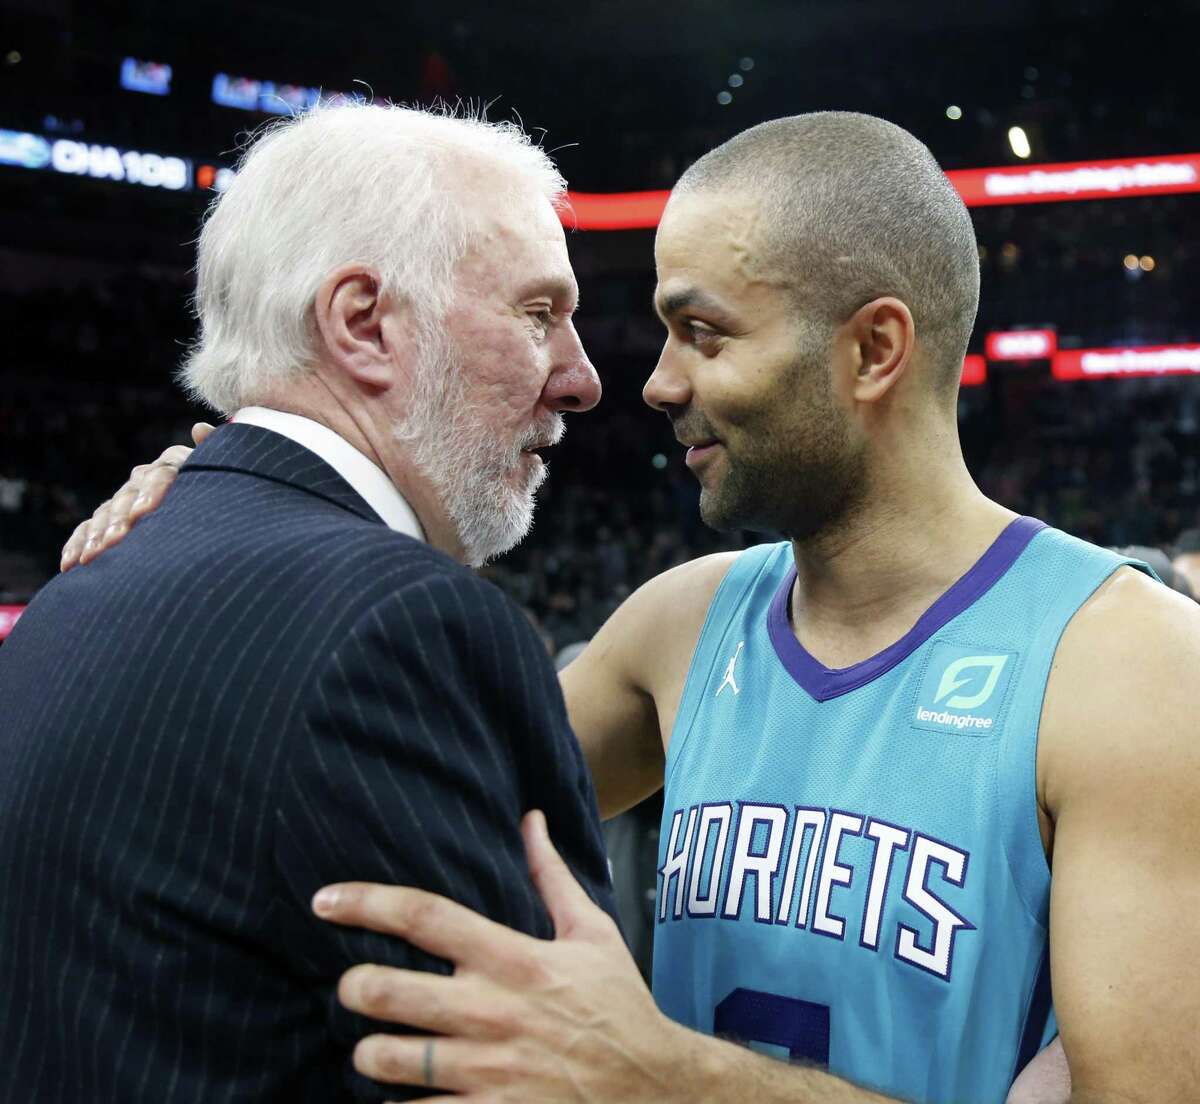 Tony Parker greets Spurs head coach Greg Popovich at the end of the game on Monday, January 14, 2019 at AT&T Center.